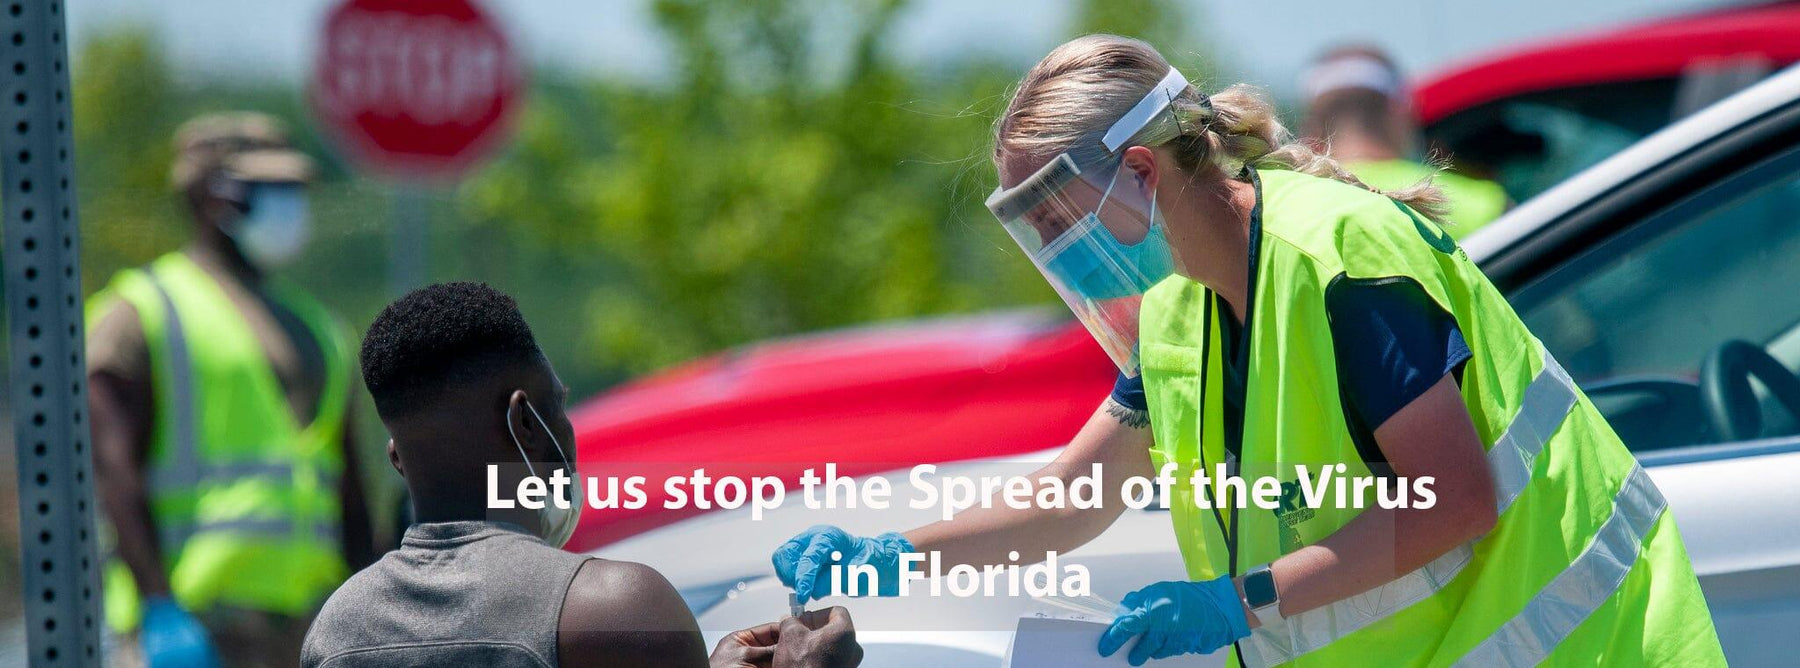 Let us stop the Spread of the Virus in Florida 